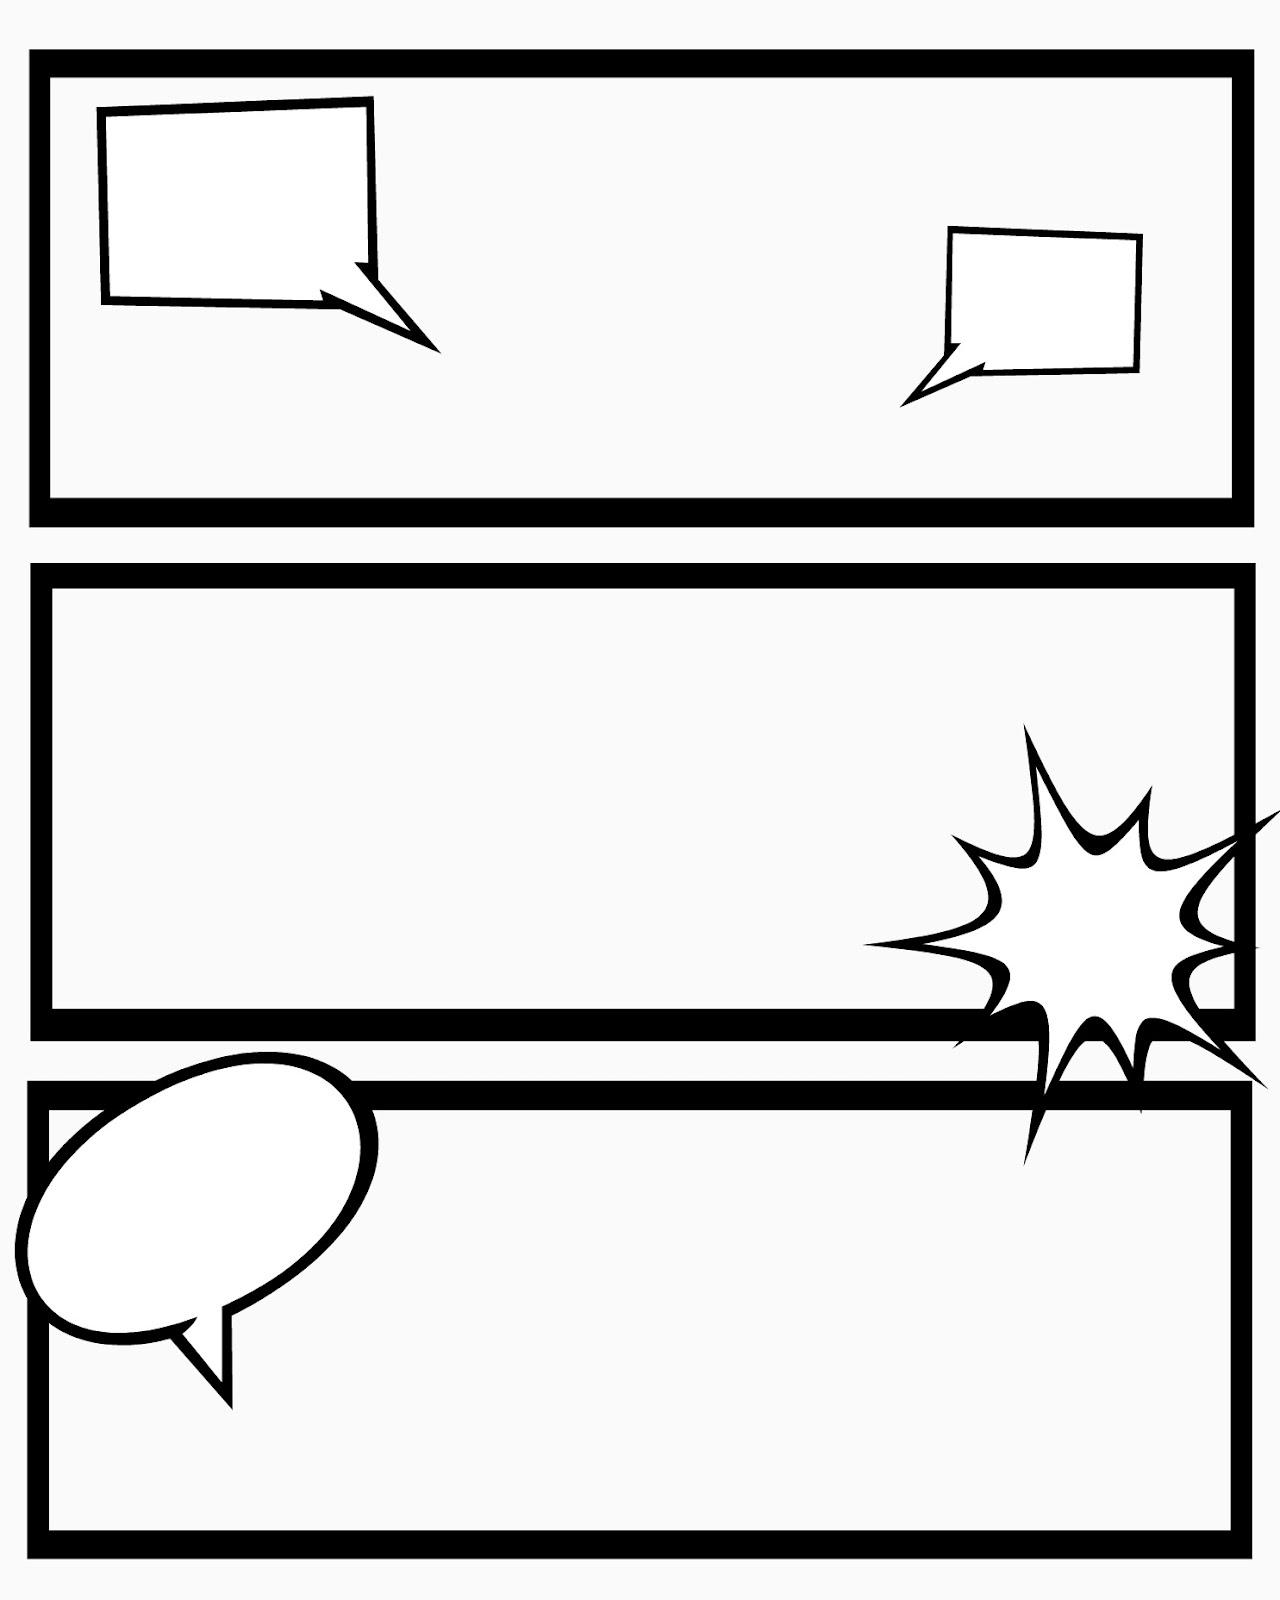 Free Comic Book Templates] Free Comic Book Templates Throughout Printable Blank Comic Strip Template For Kids